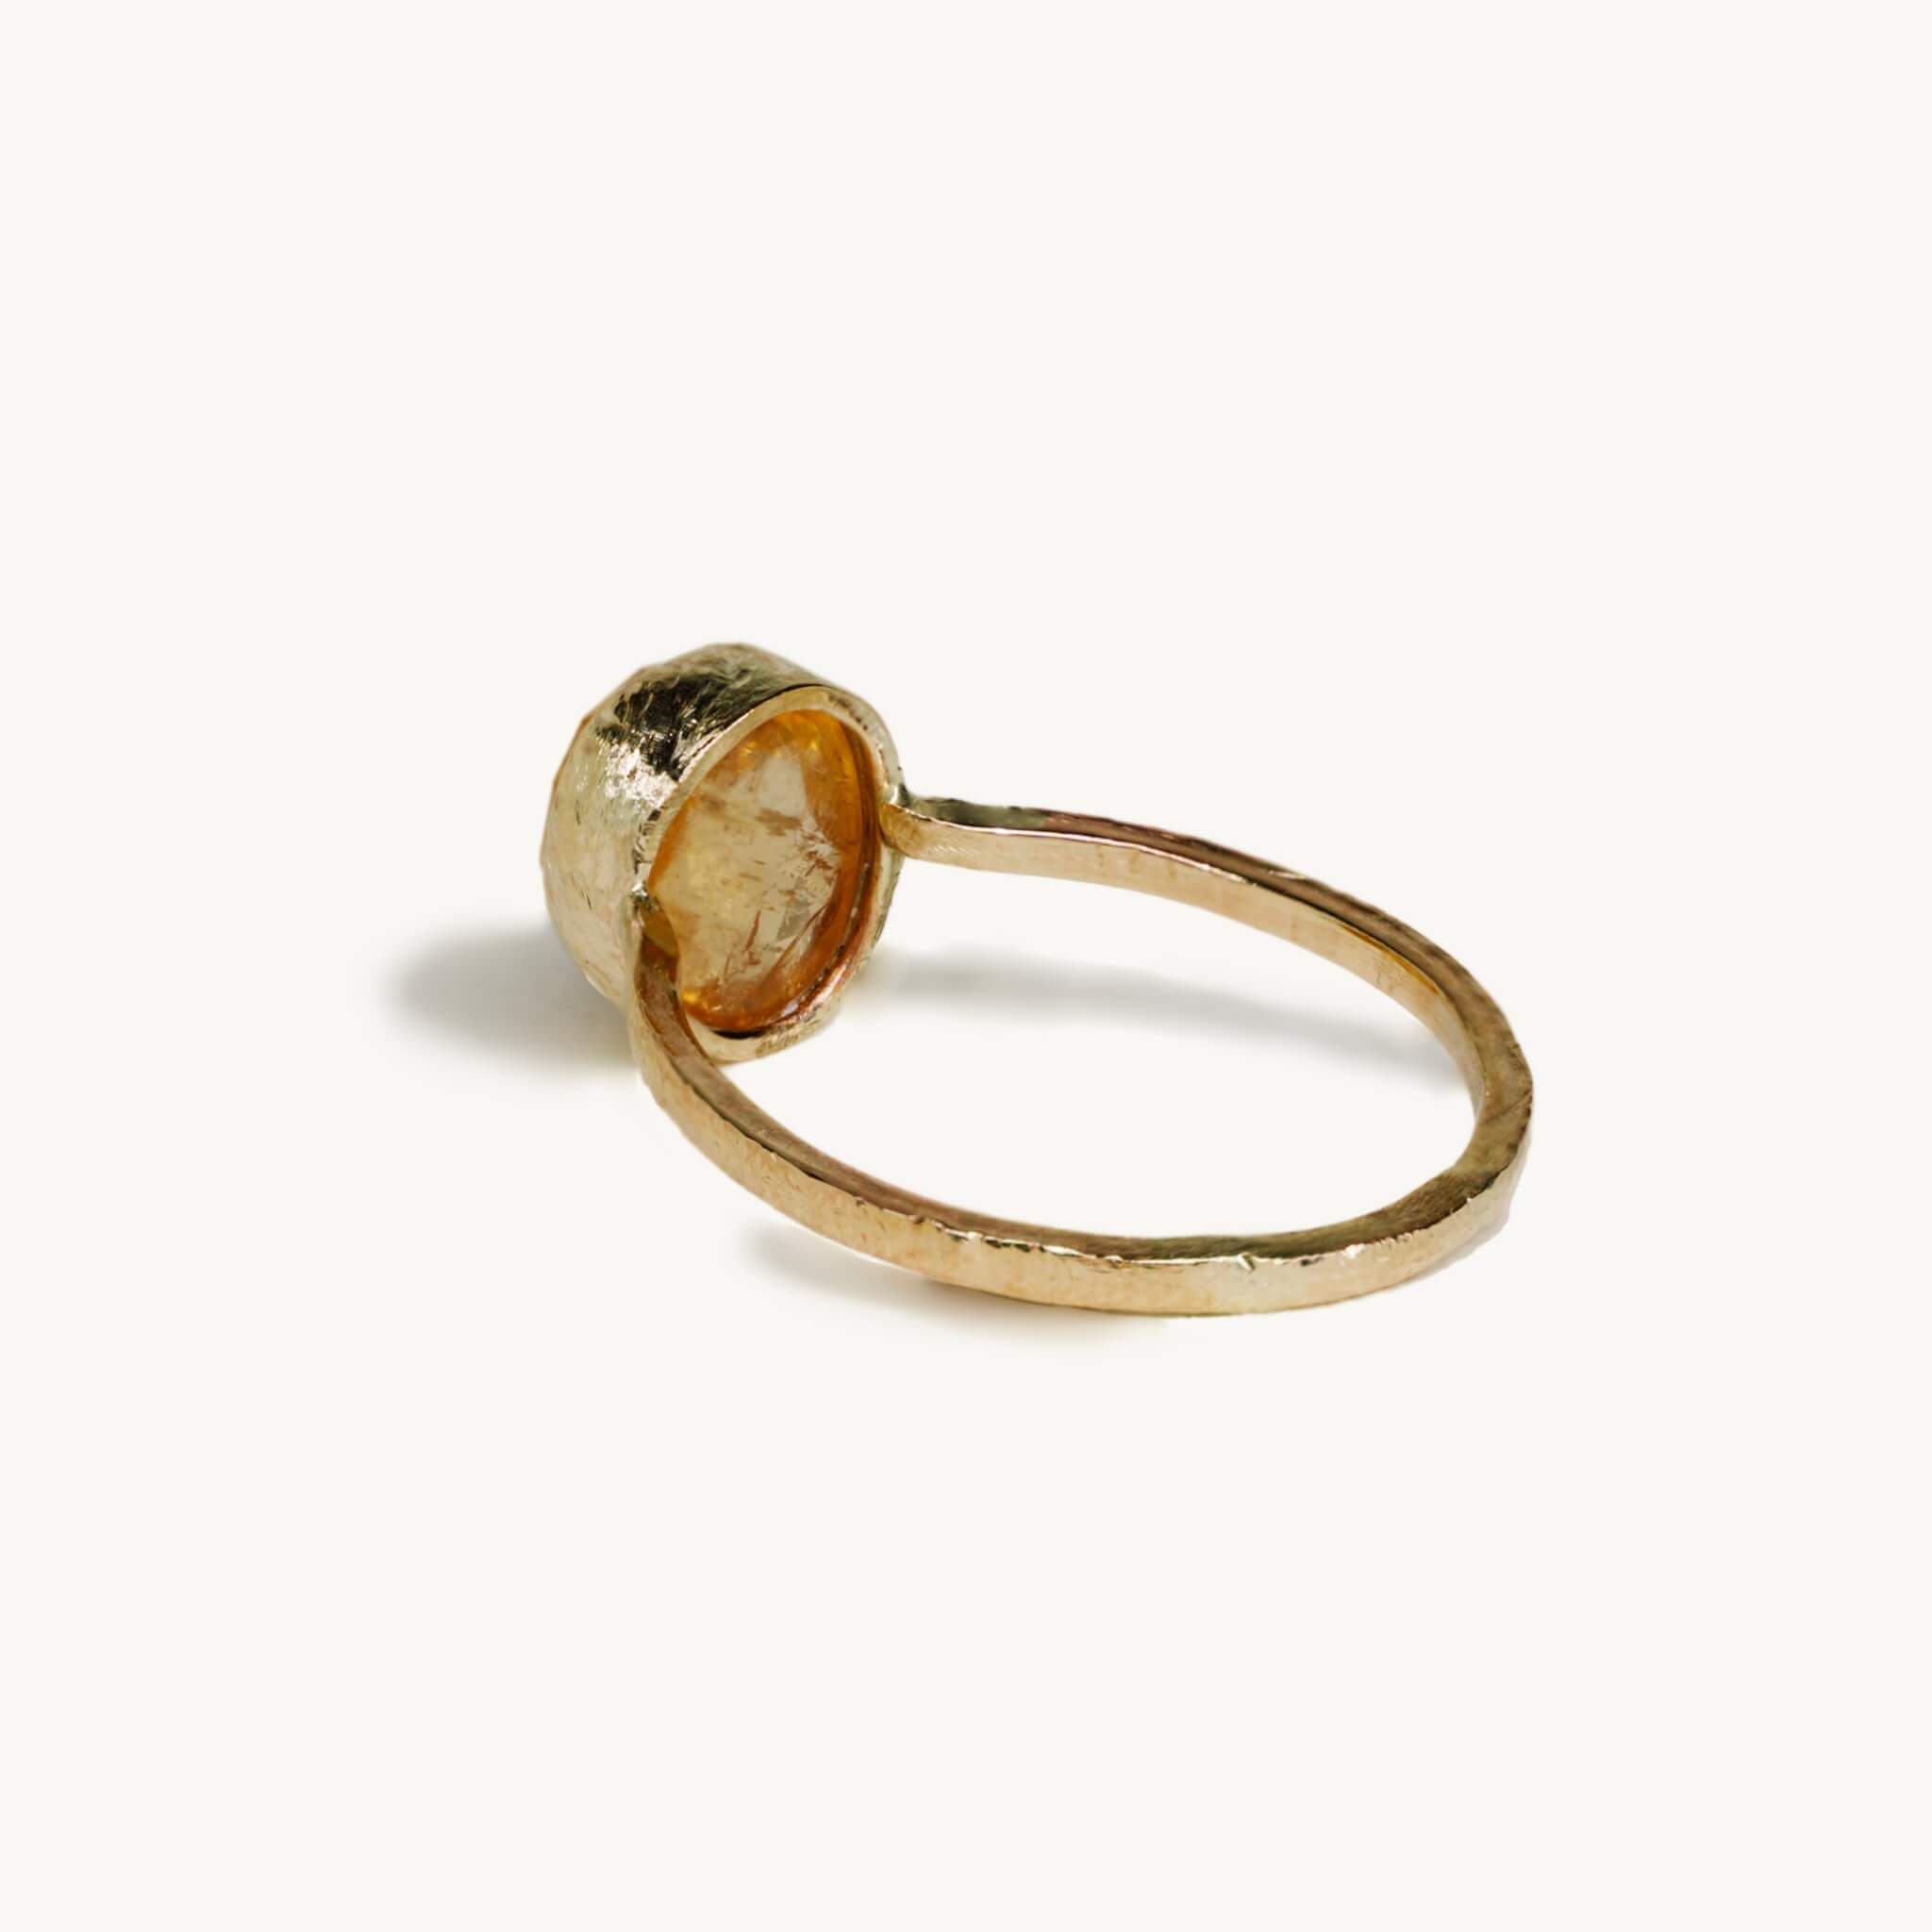 Imperial topaz ring back view